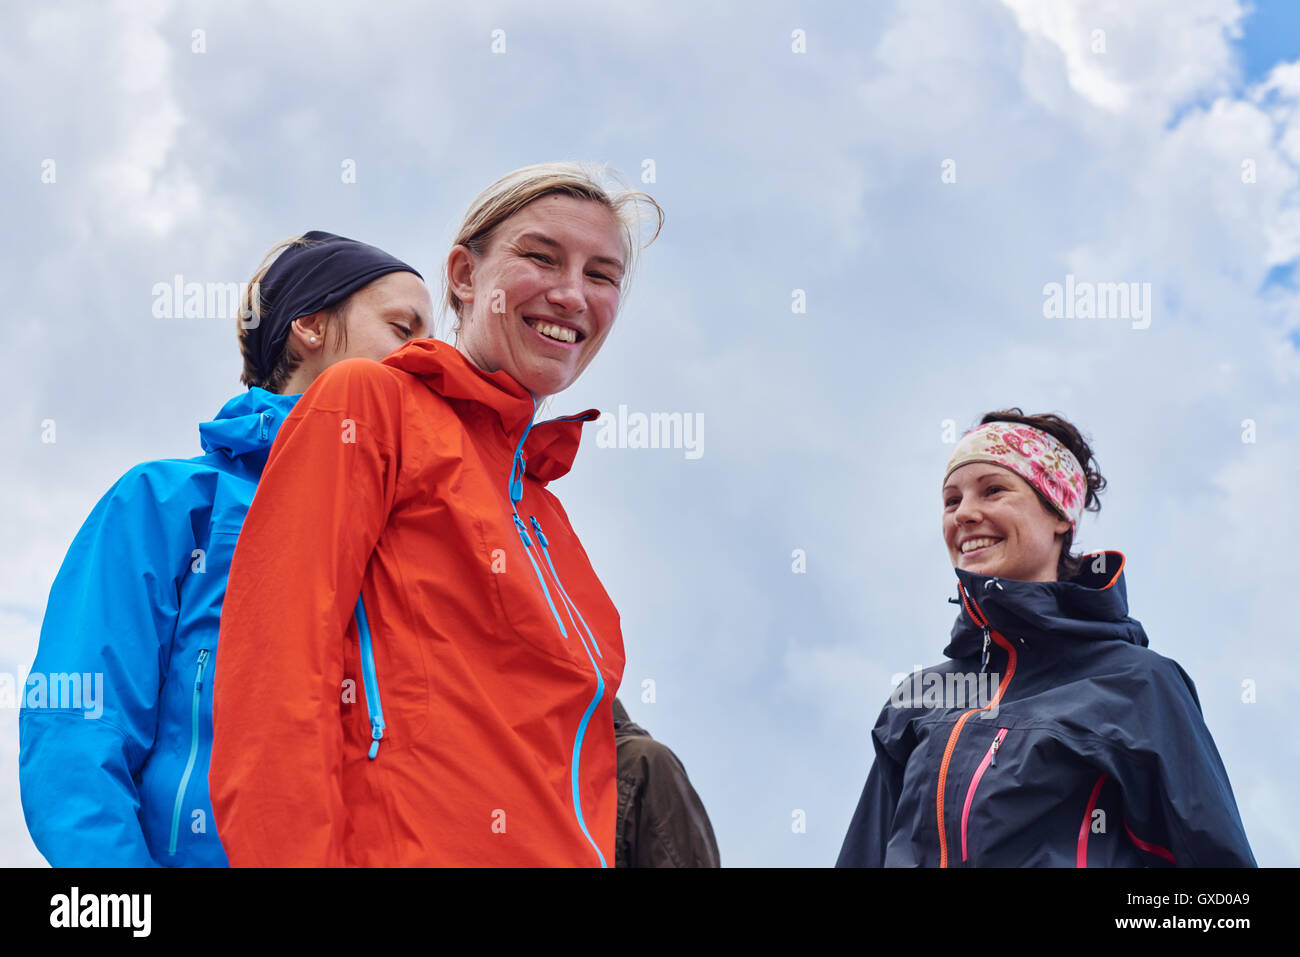 Portrait of hikers looking at camera smiling, Austria Stock Photo